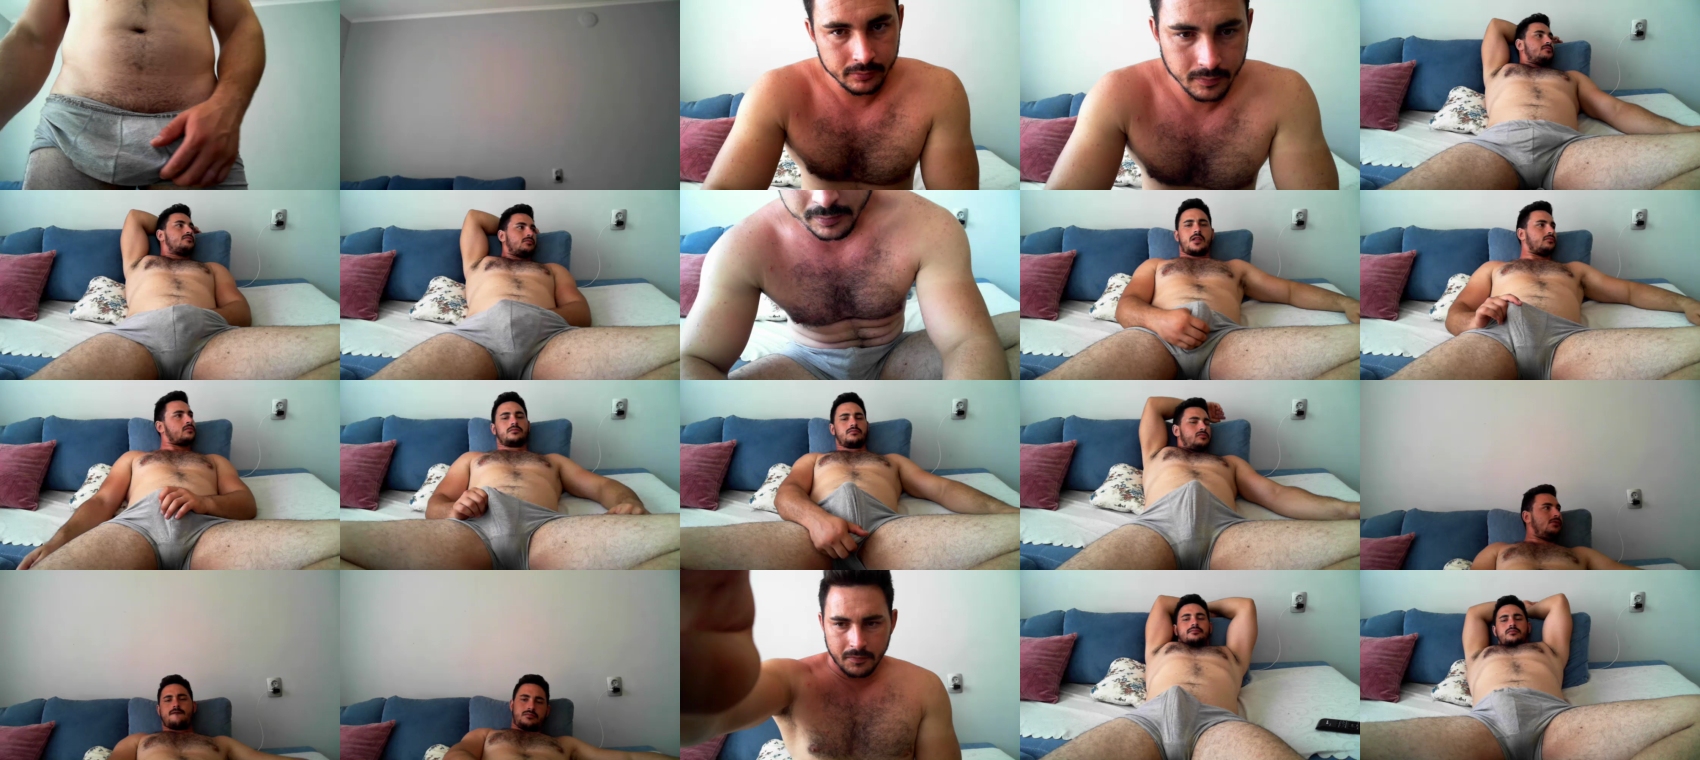 djmute_33  20-08-2022 Recorded Video gay